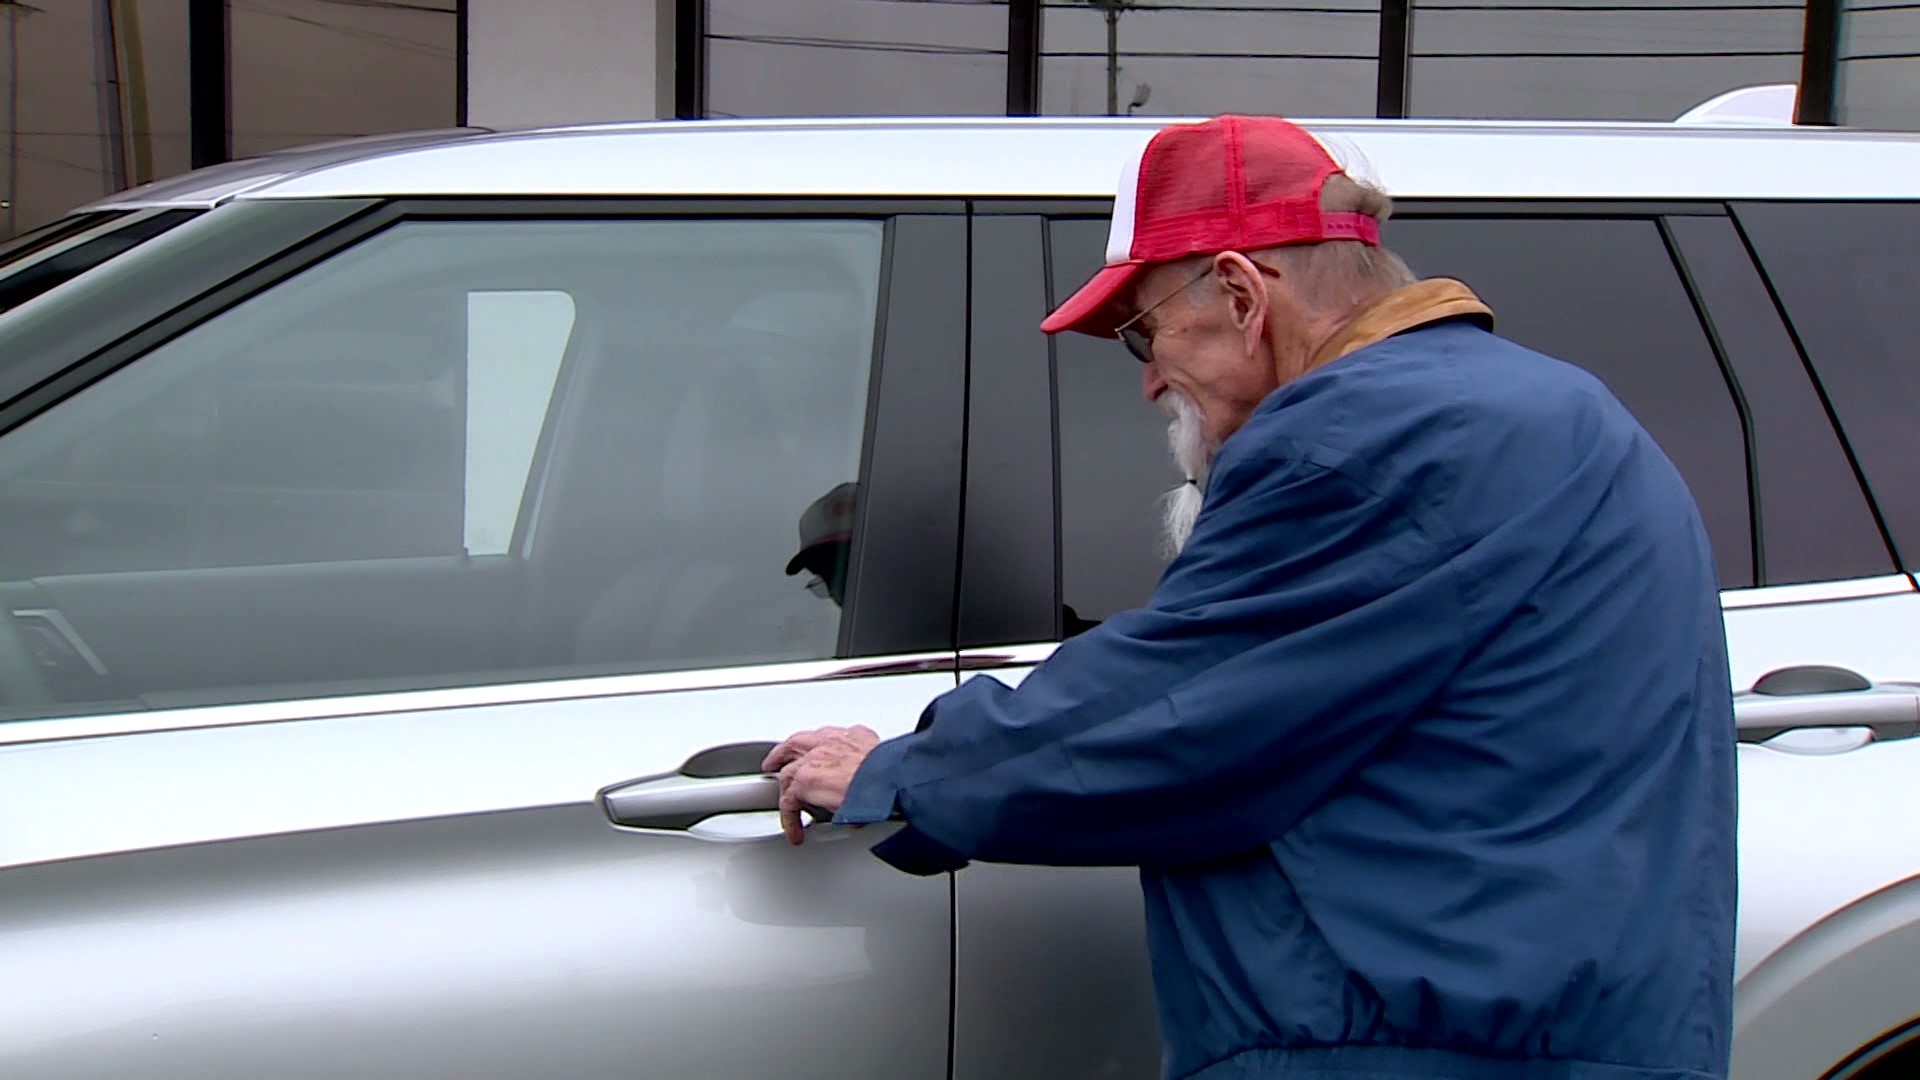 It's not often that someone has the opportunity to win a new SUV in a national contest, but an 83-year-old Mountain Home man just picked up his new ride.